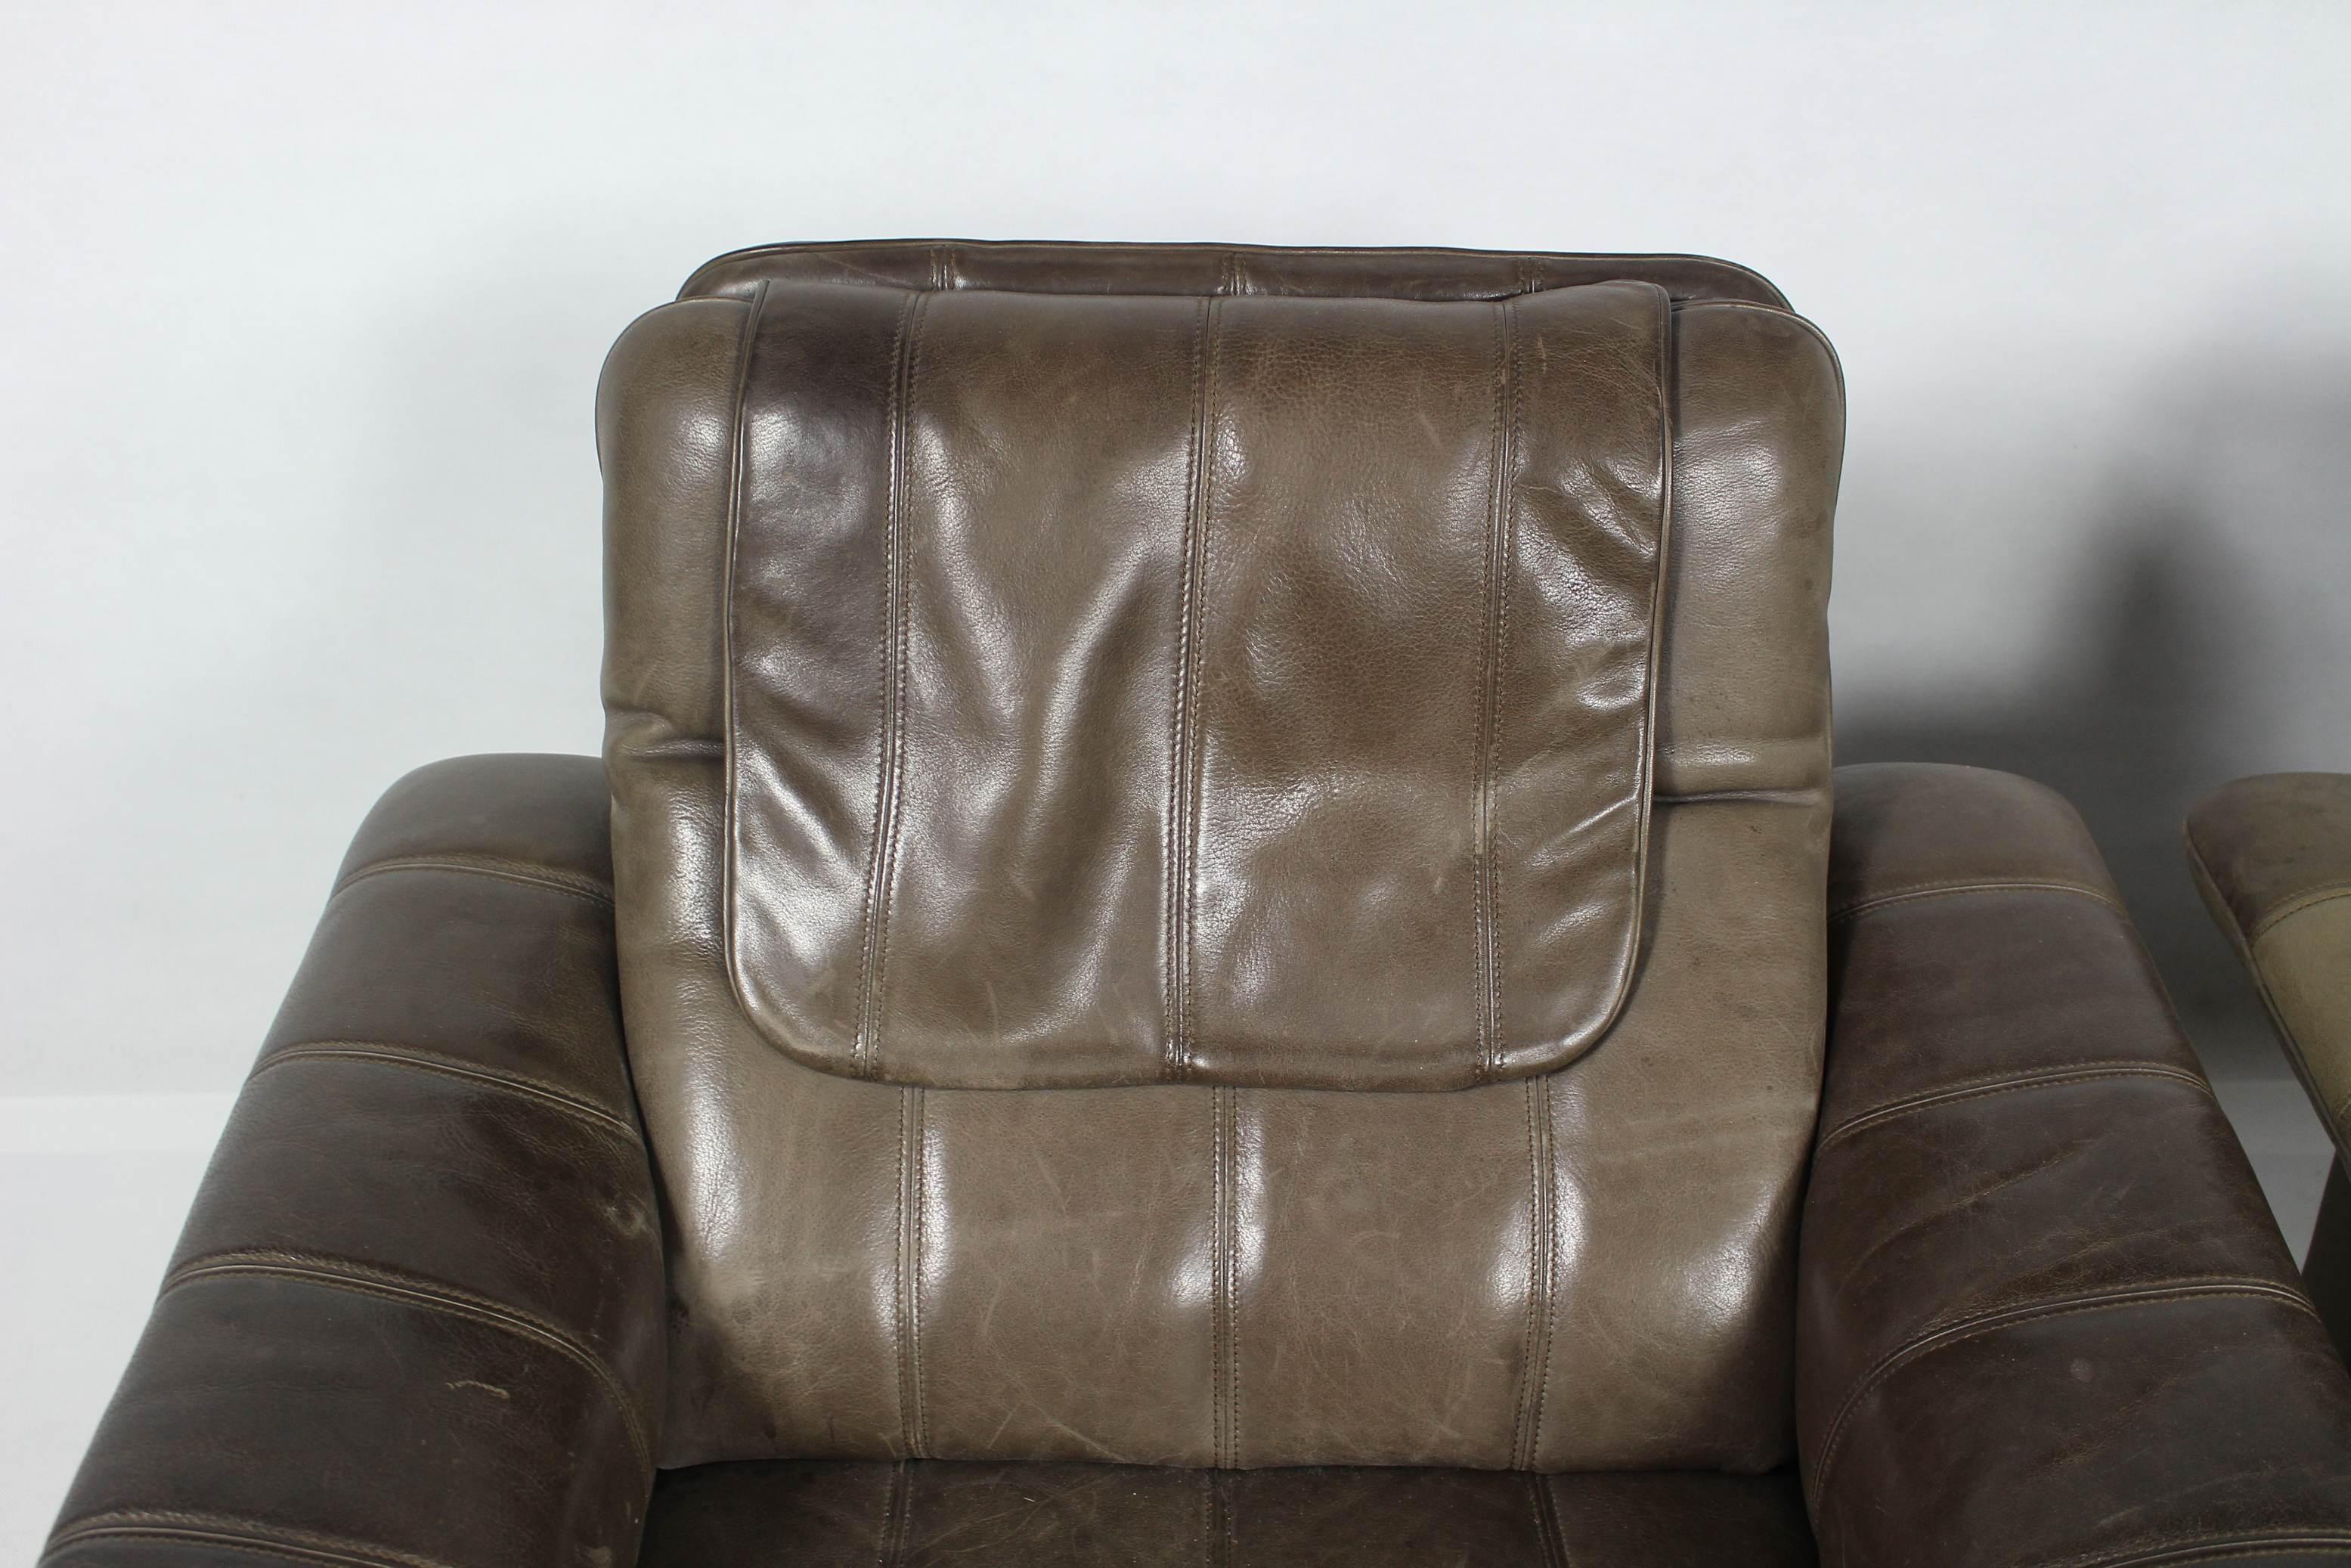 20th Century Buffalo Leather Lounge Chair by De Sede of Switzerland, 1970s For Sale